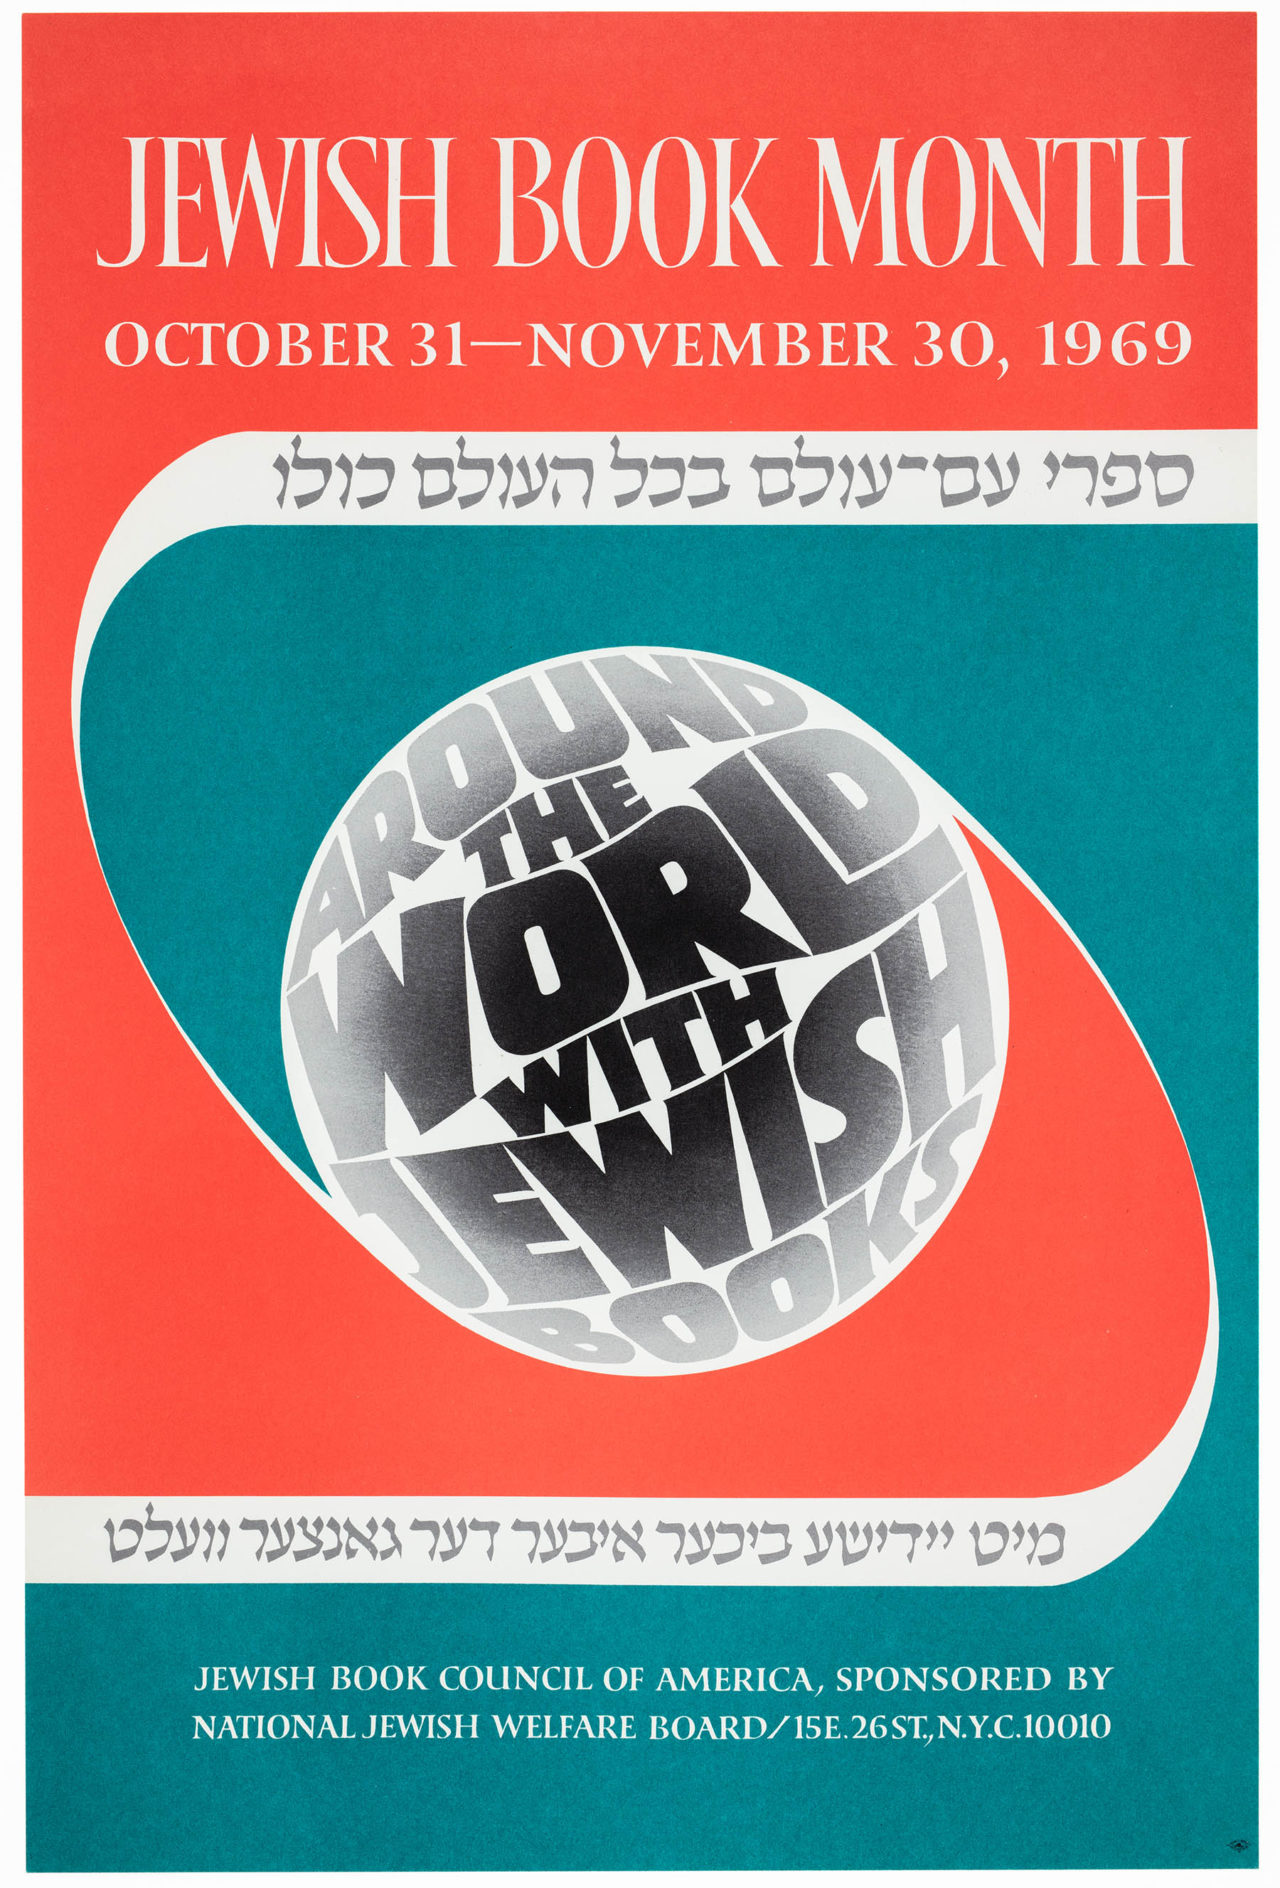 Jewish Book Month poster 1969